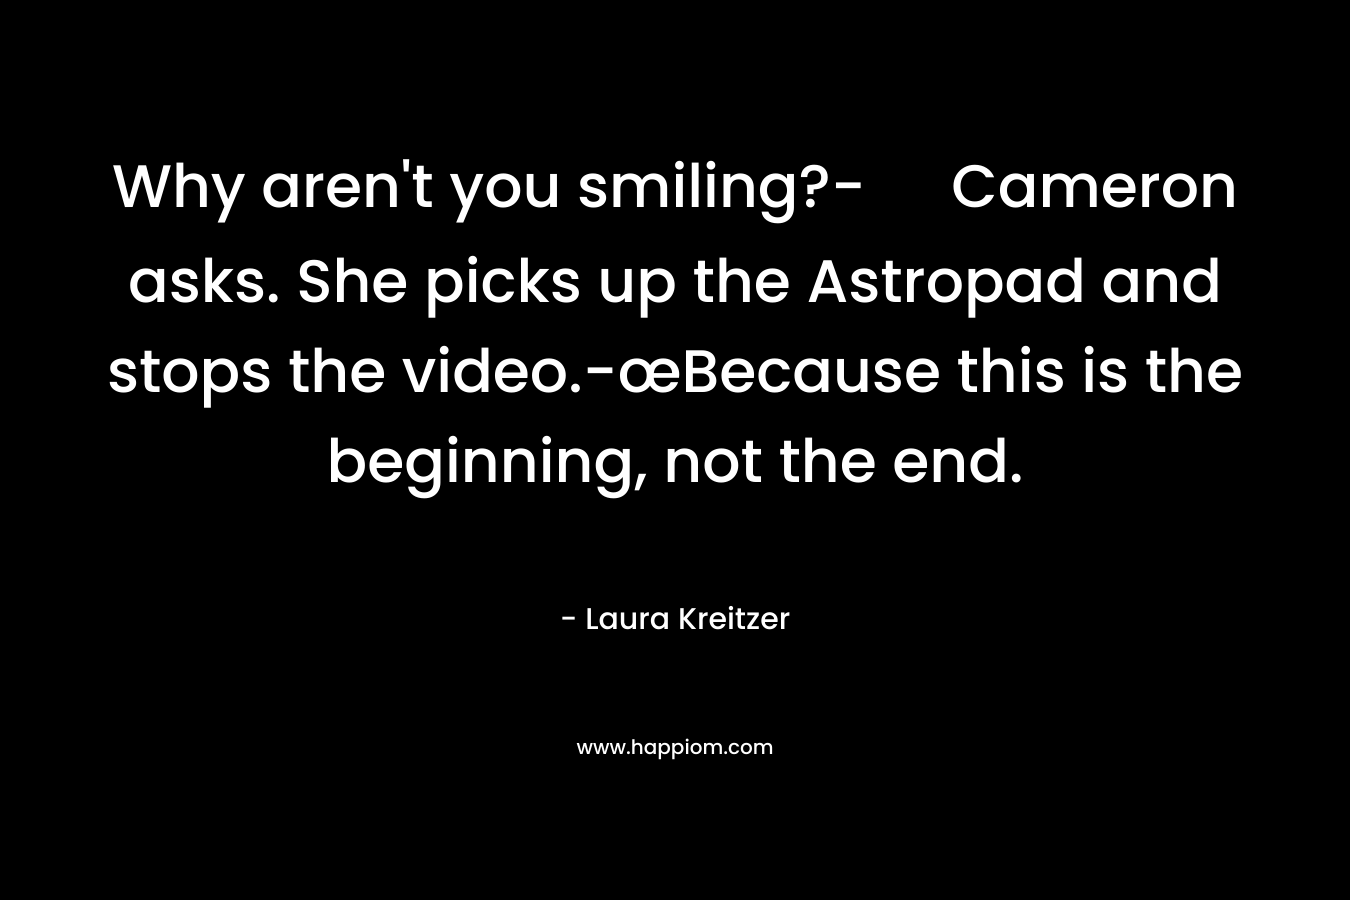 Why aren’t you smiling?- Cameron asks. She picks up the Astropad and stops the video.-œBecause this is the beginning, not the end. – Laura Kreitzer